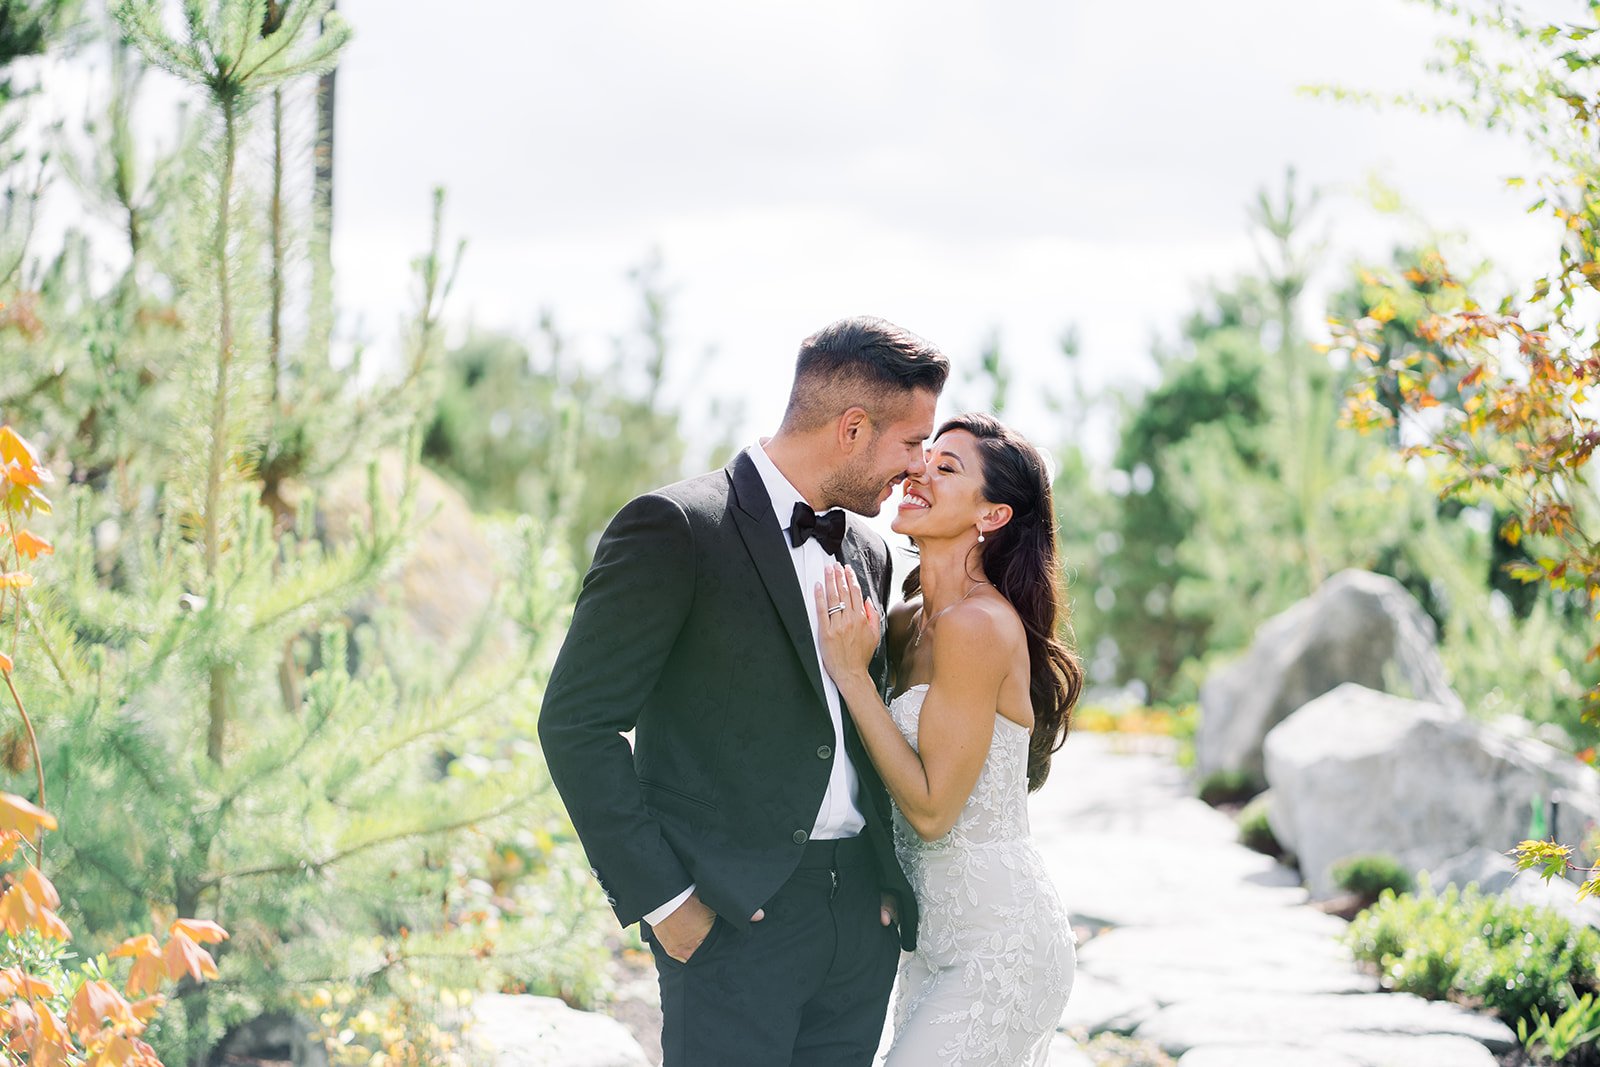 Bride and Groom lock loving gazes in lush pacific northwest garden during Vancouver wedding